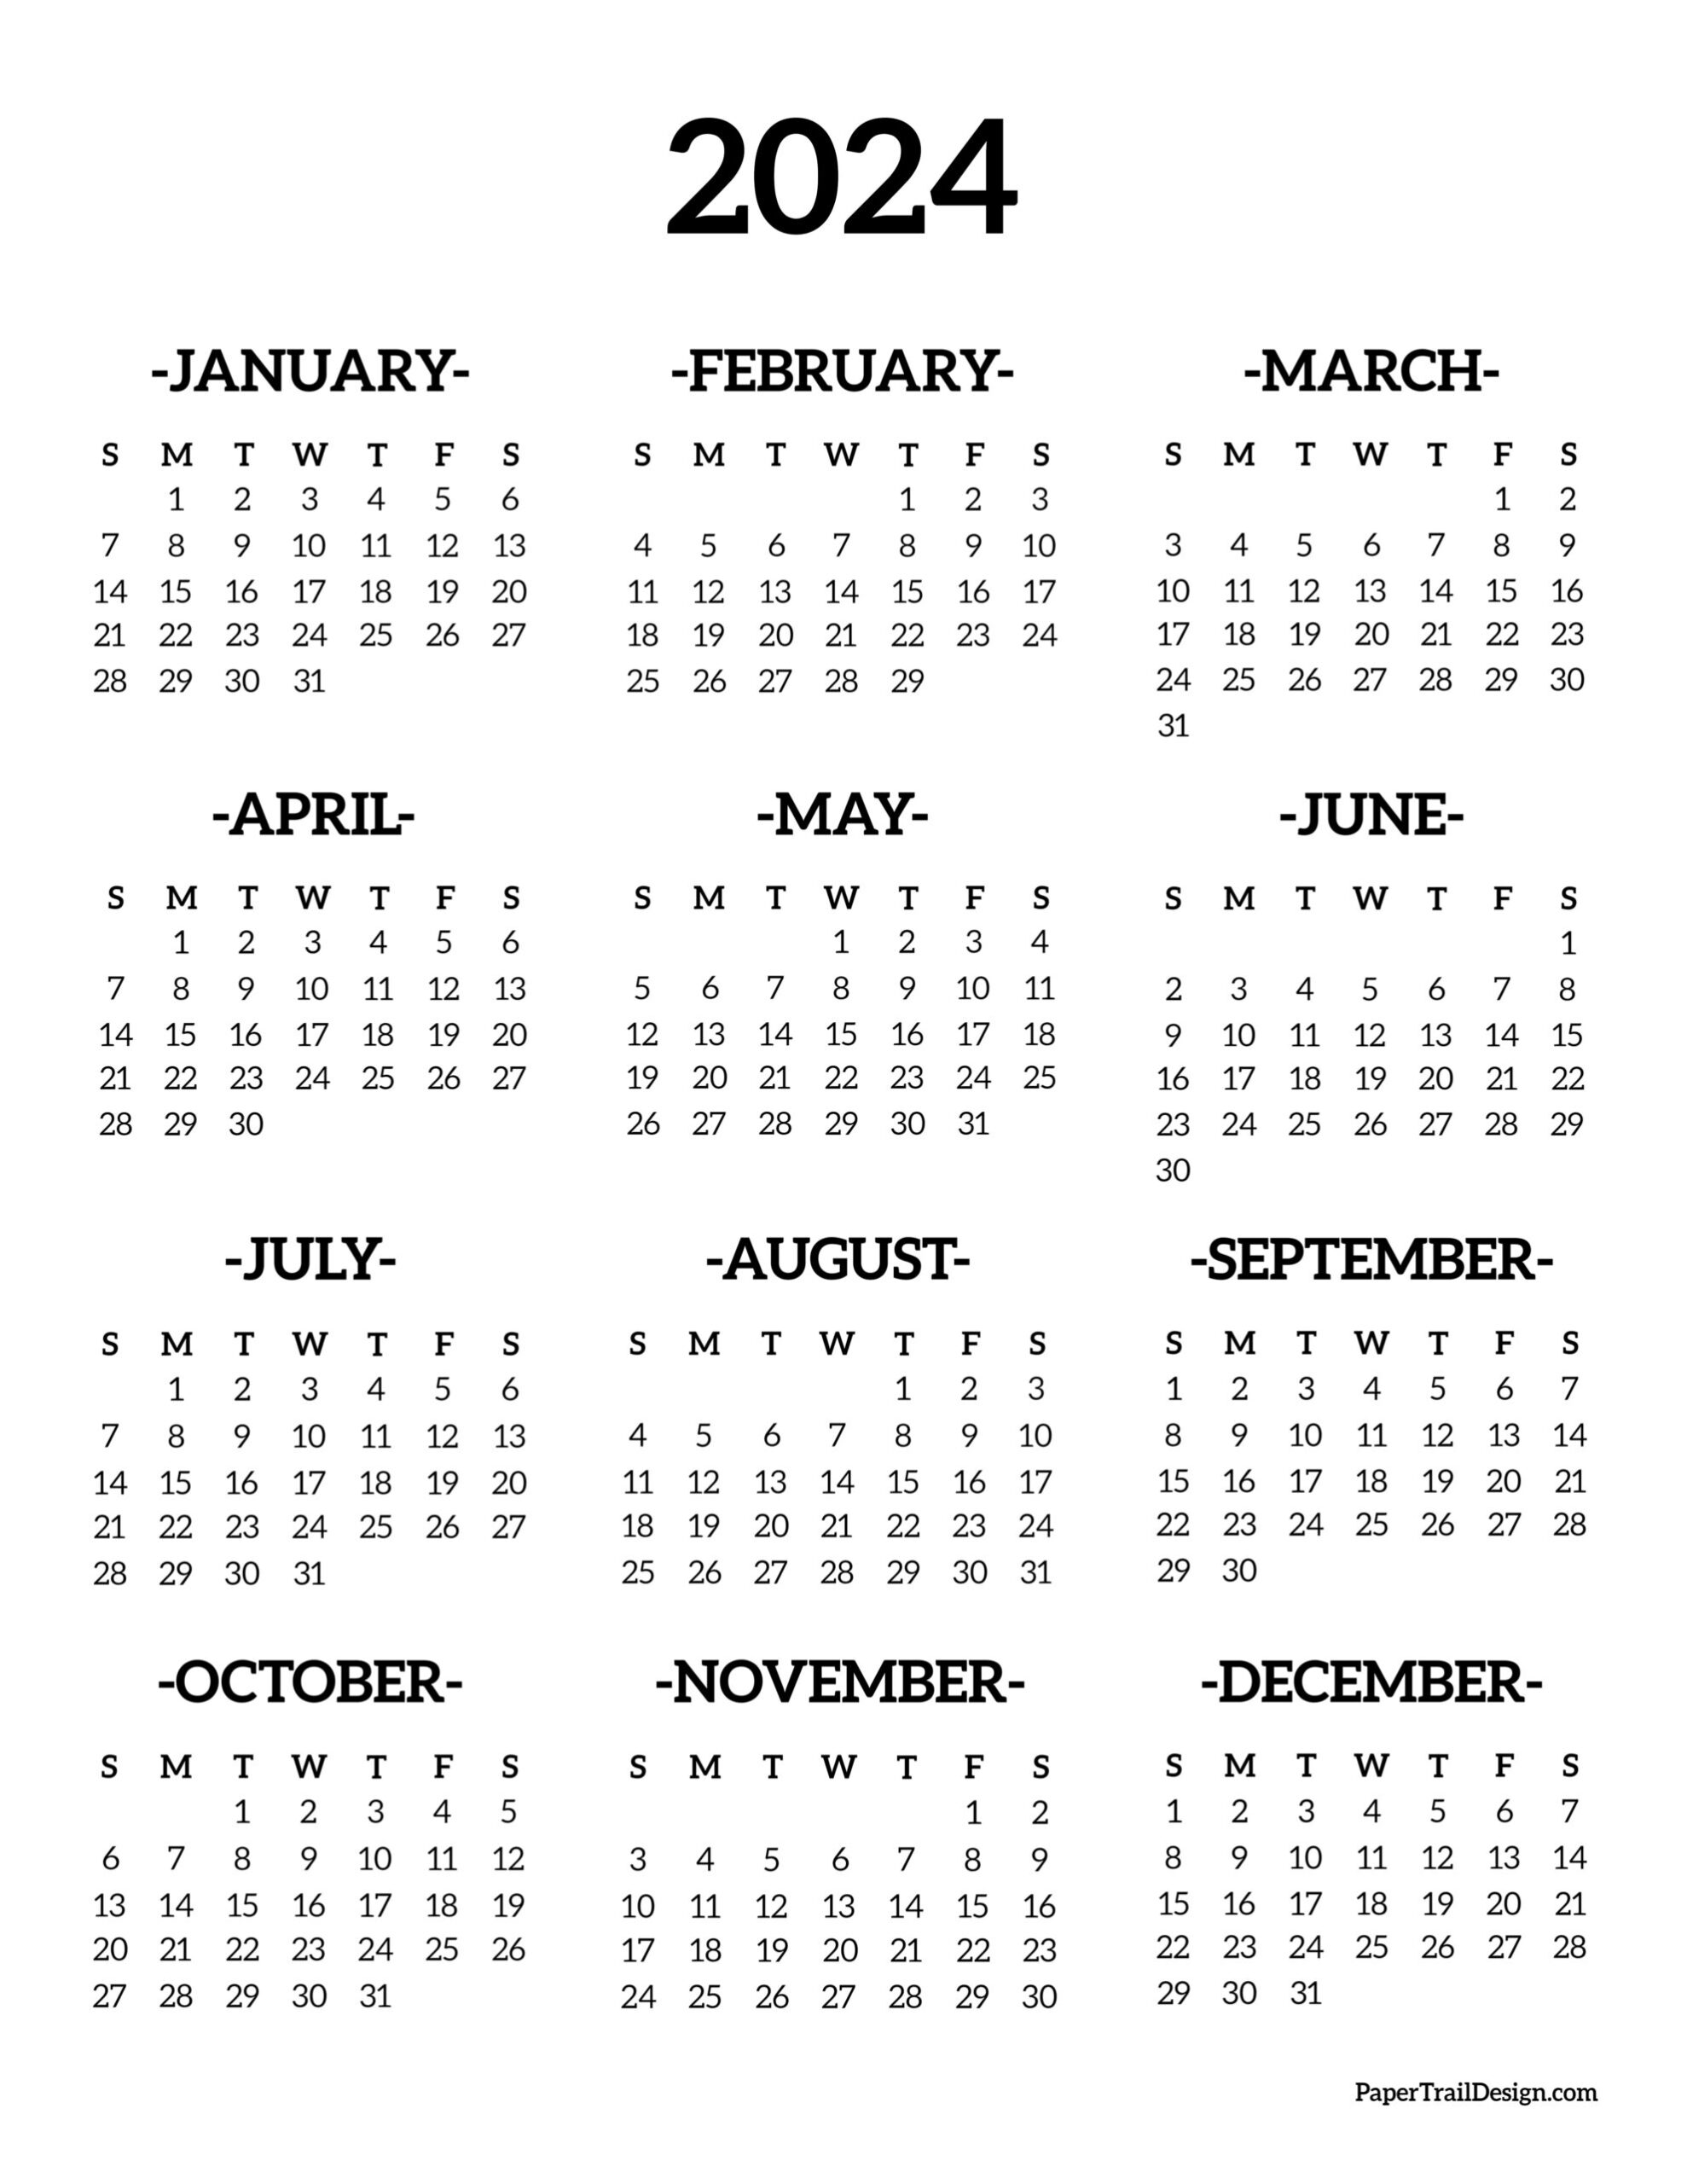 Calendar 2024 Printable One Page - Paper Trail Design for 2024 Printable Year Calendar